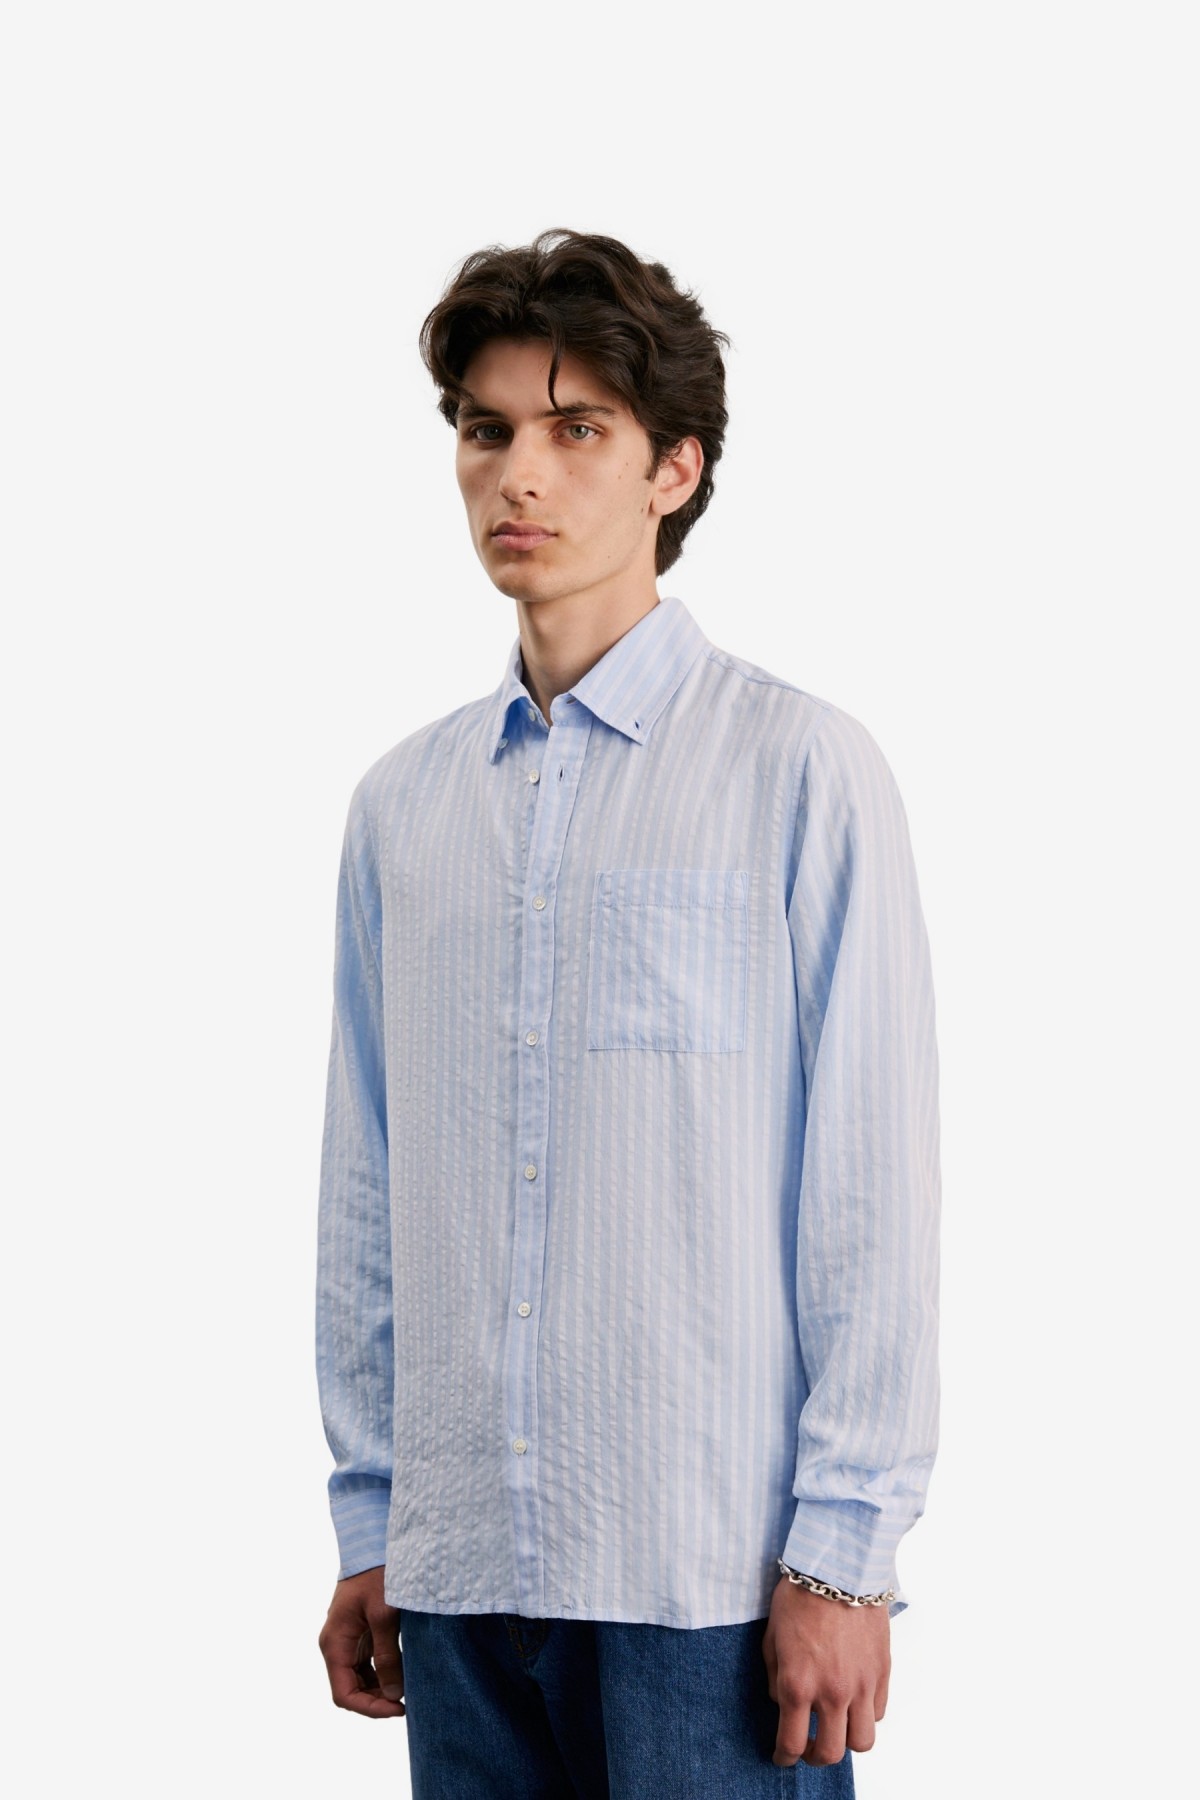 Another Aspect Shirt 1.0 in Light Blue Stripe